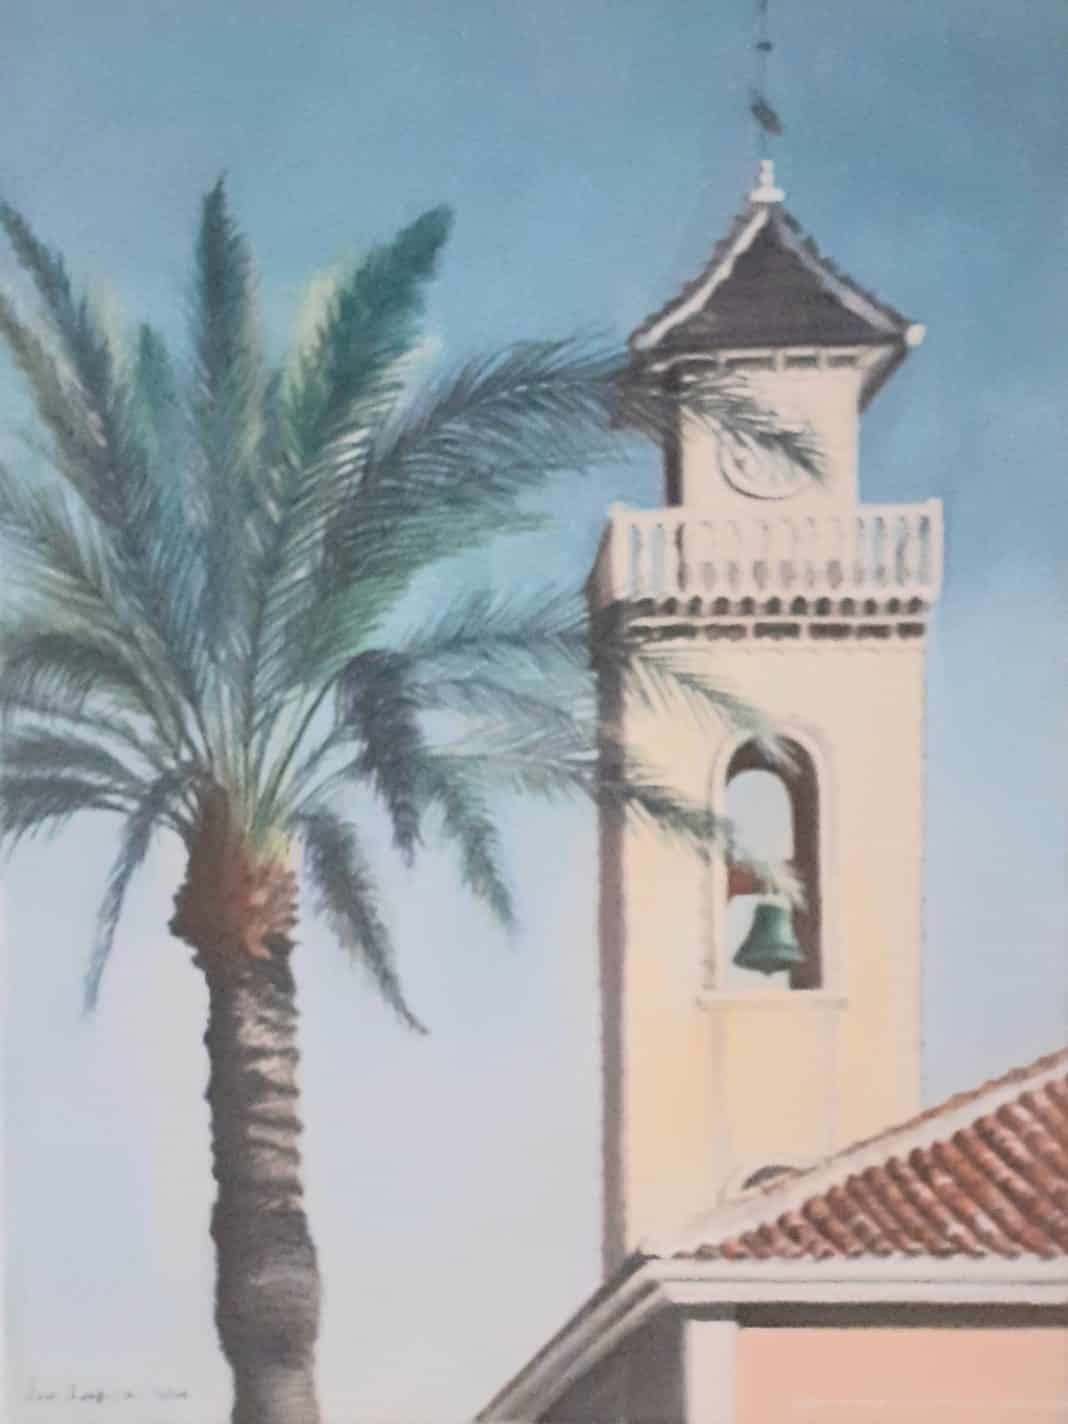 Los Montesinos Church Bell tower prints to raise money for children.